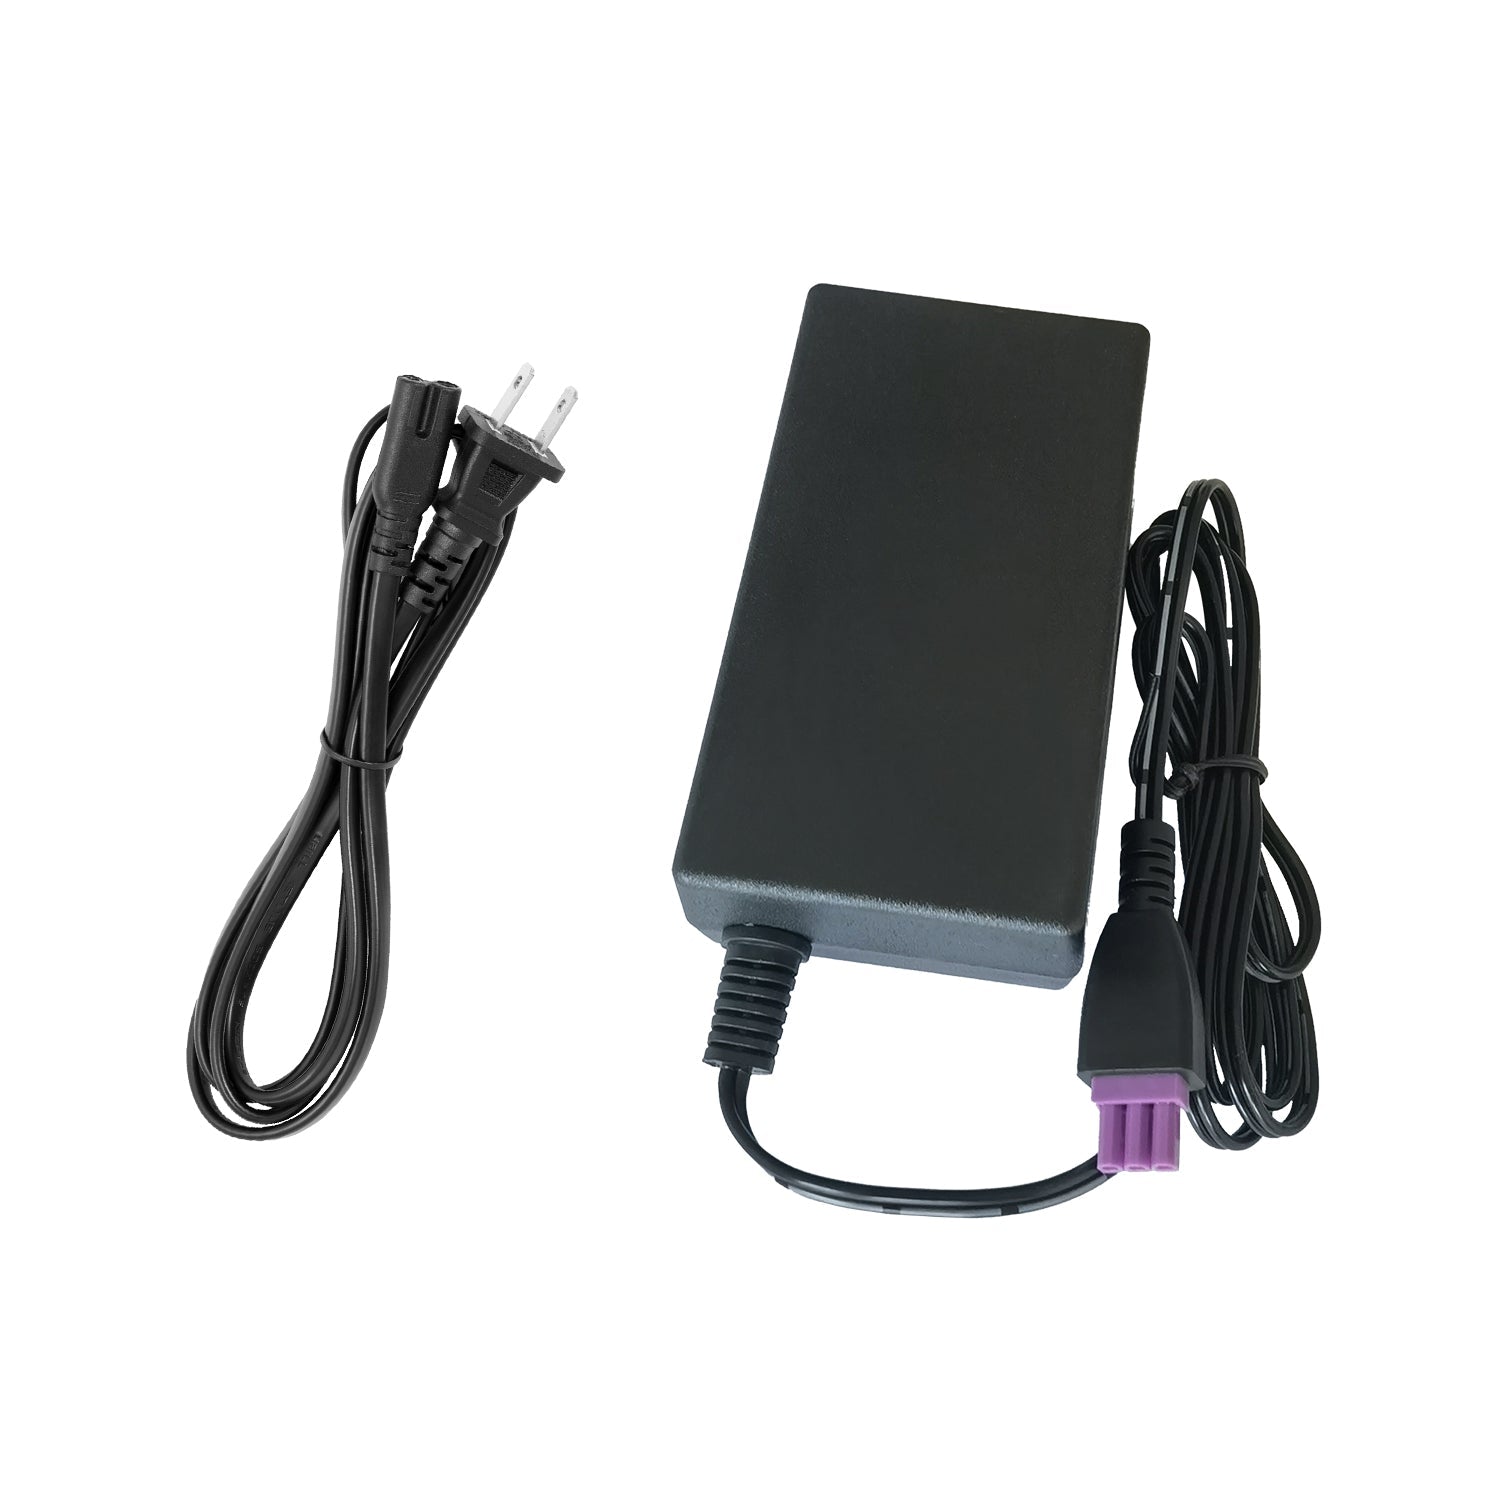 Power Adapter for HP 0957-2259 Printer.